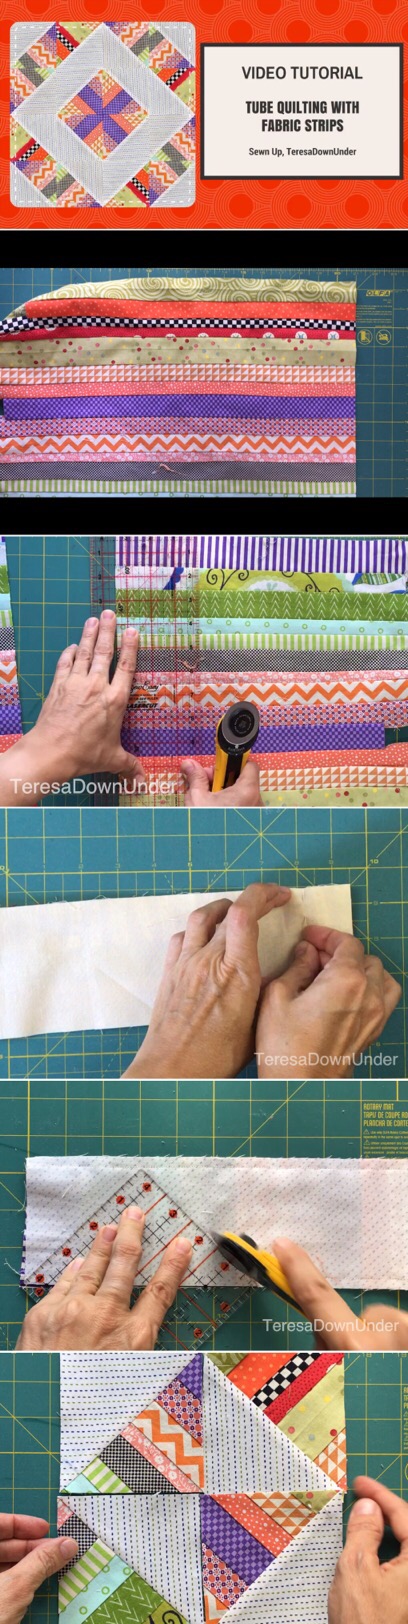 Video tutorial: tube quilting with fabric strips